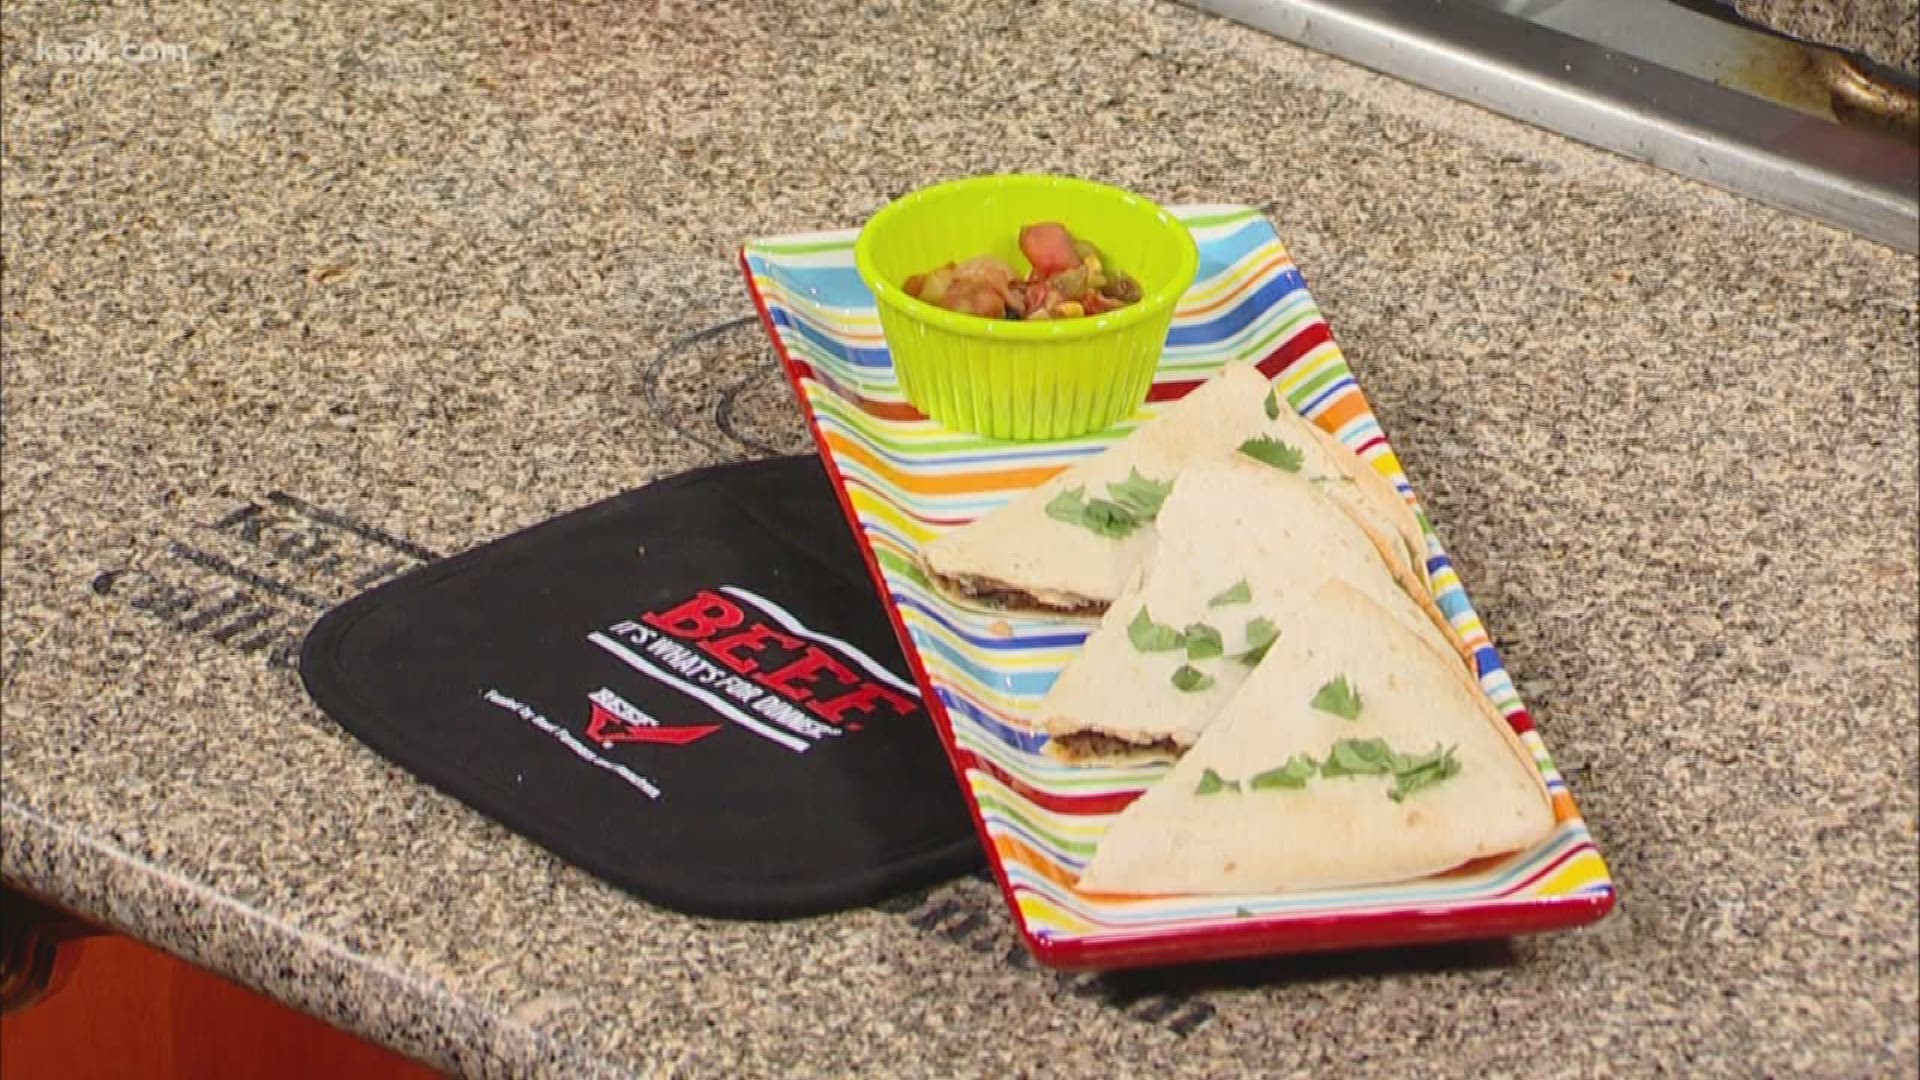 You’ve heard of Taco Tuesday, but what about Quesadilla Wednesday? The Missouri Beef Council demonstrates a recipe for Crazy Quesadillas.